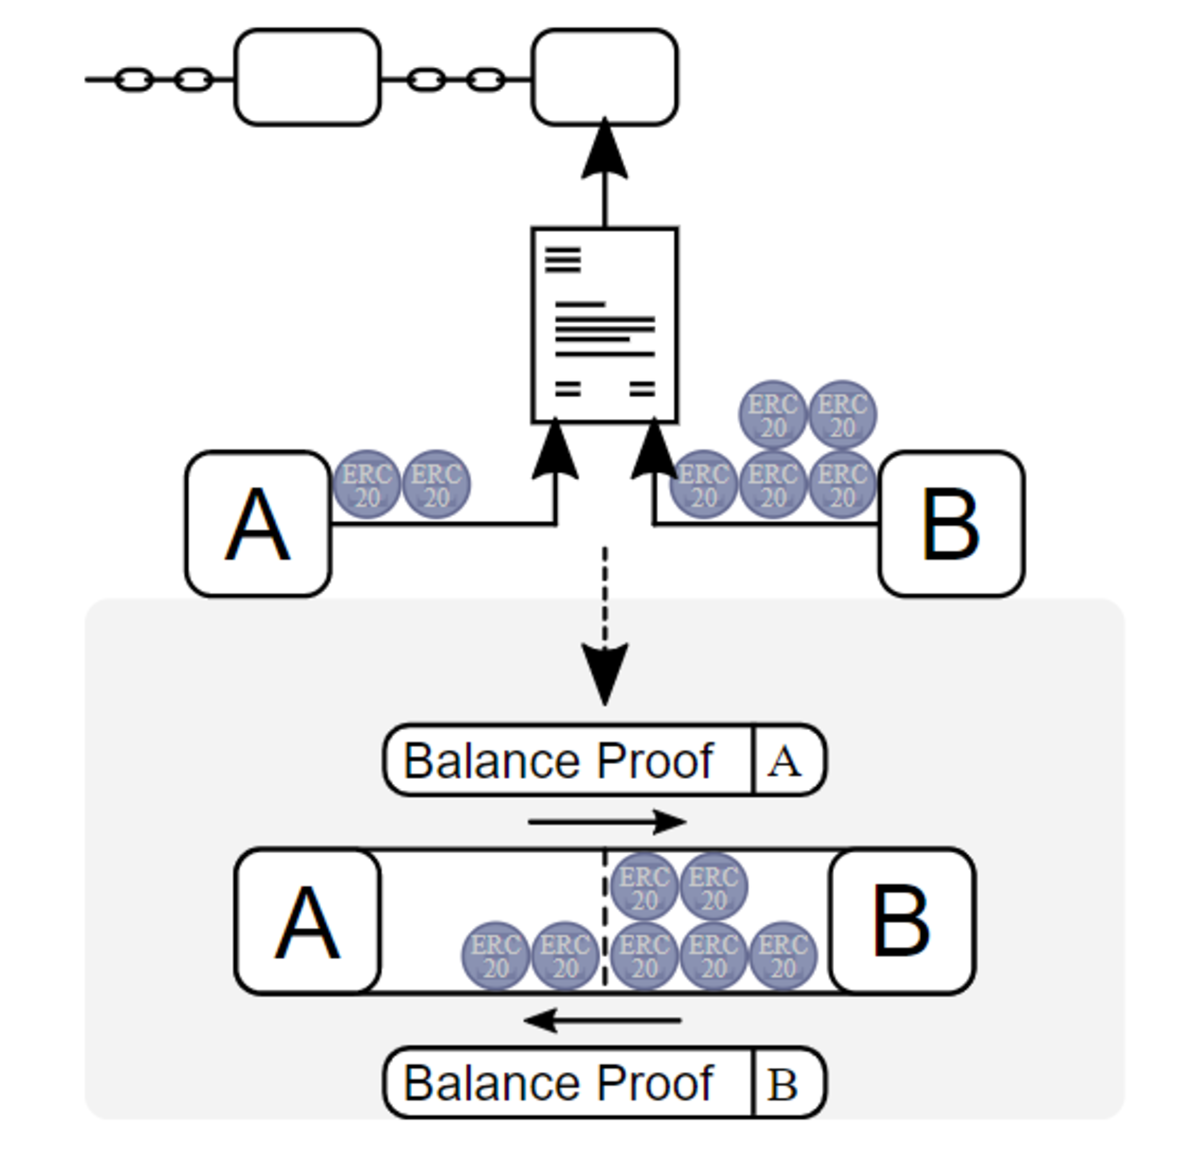 Figure 1. Simple Bidirectional Payment Channel.